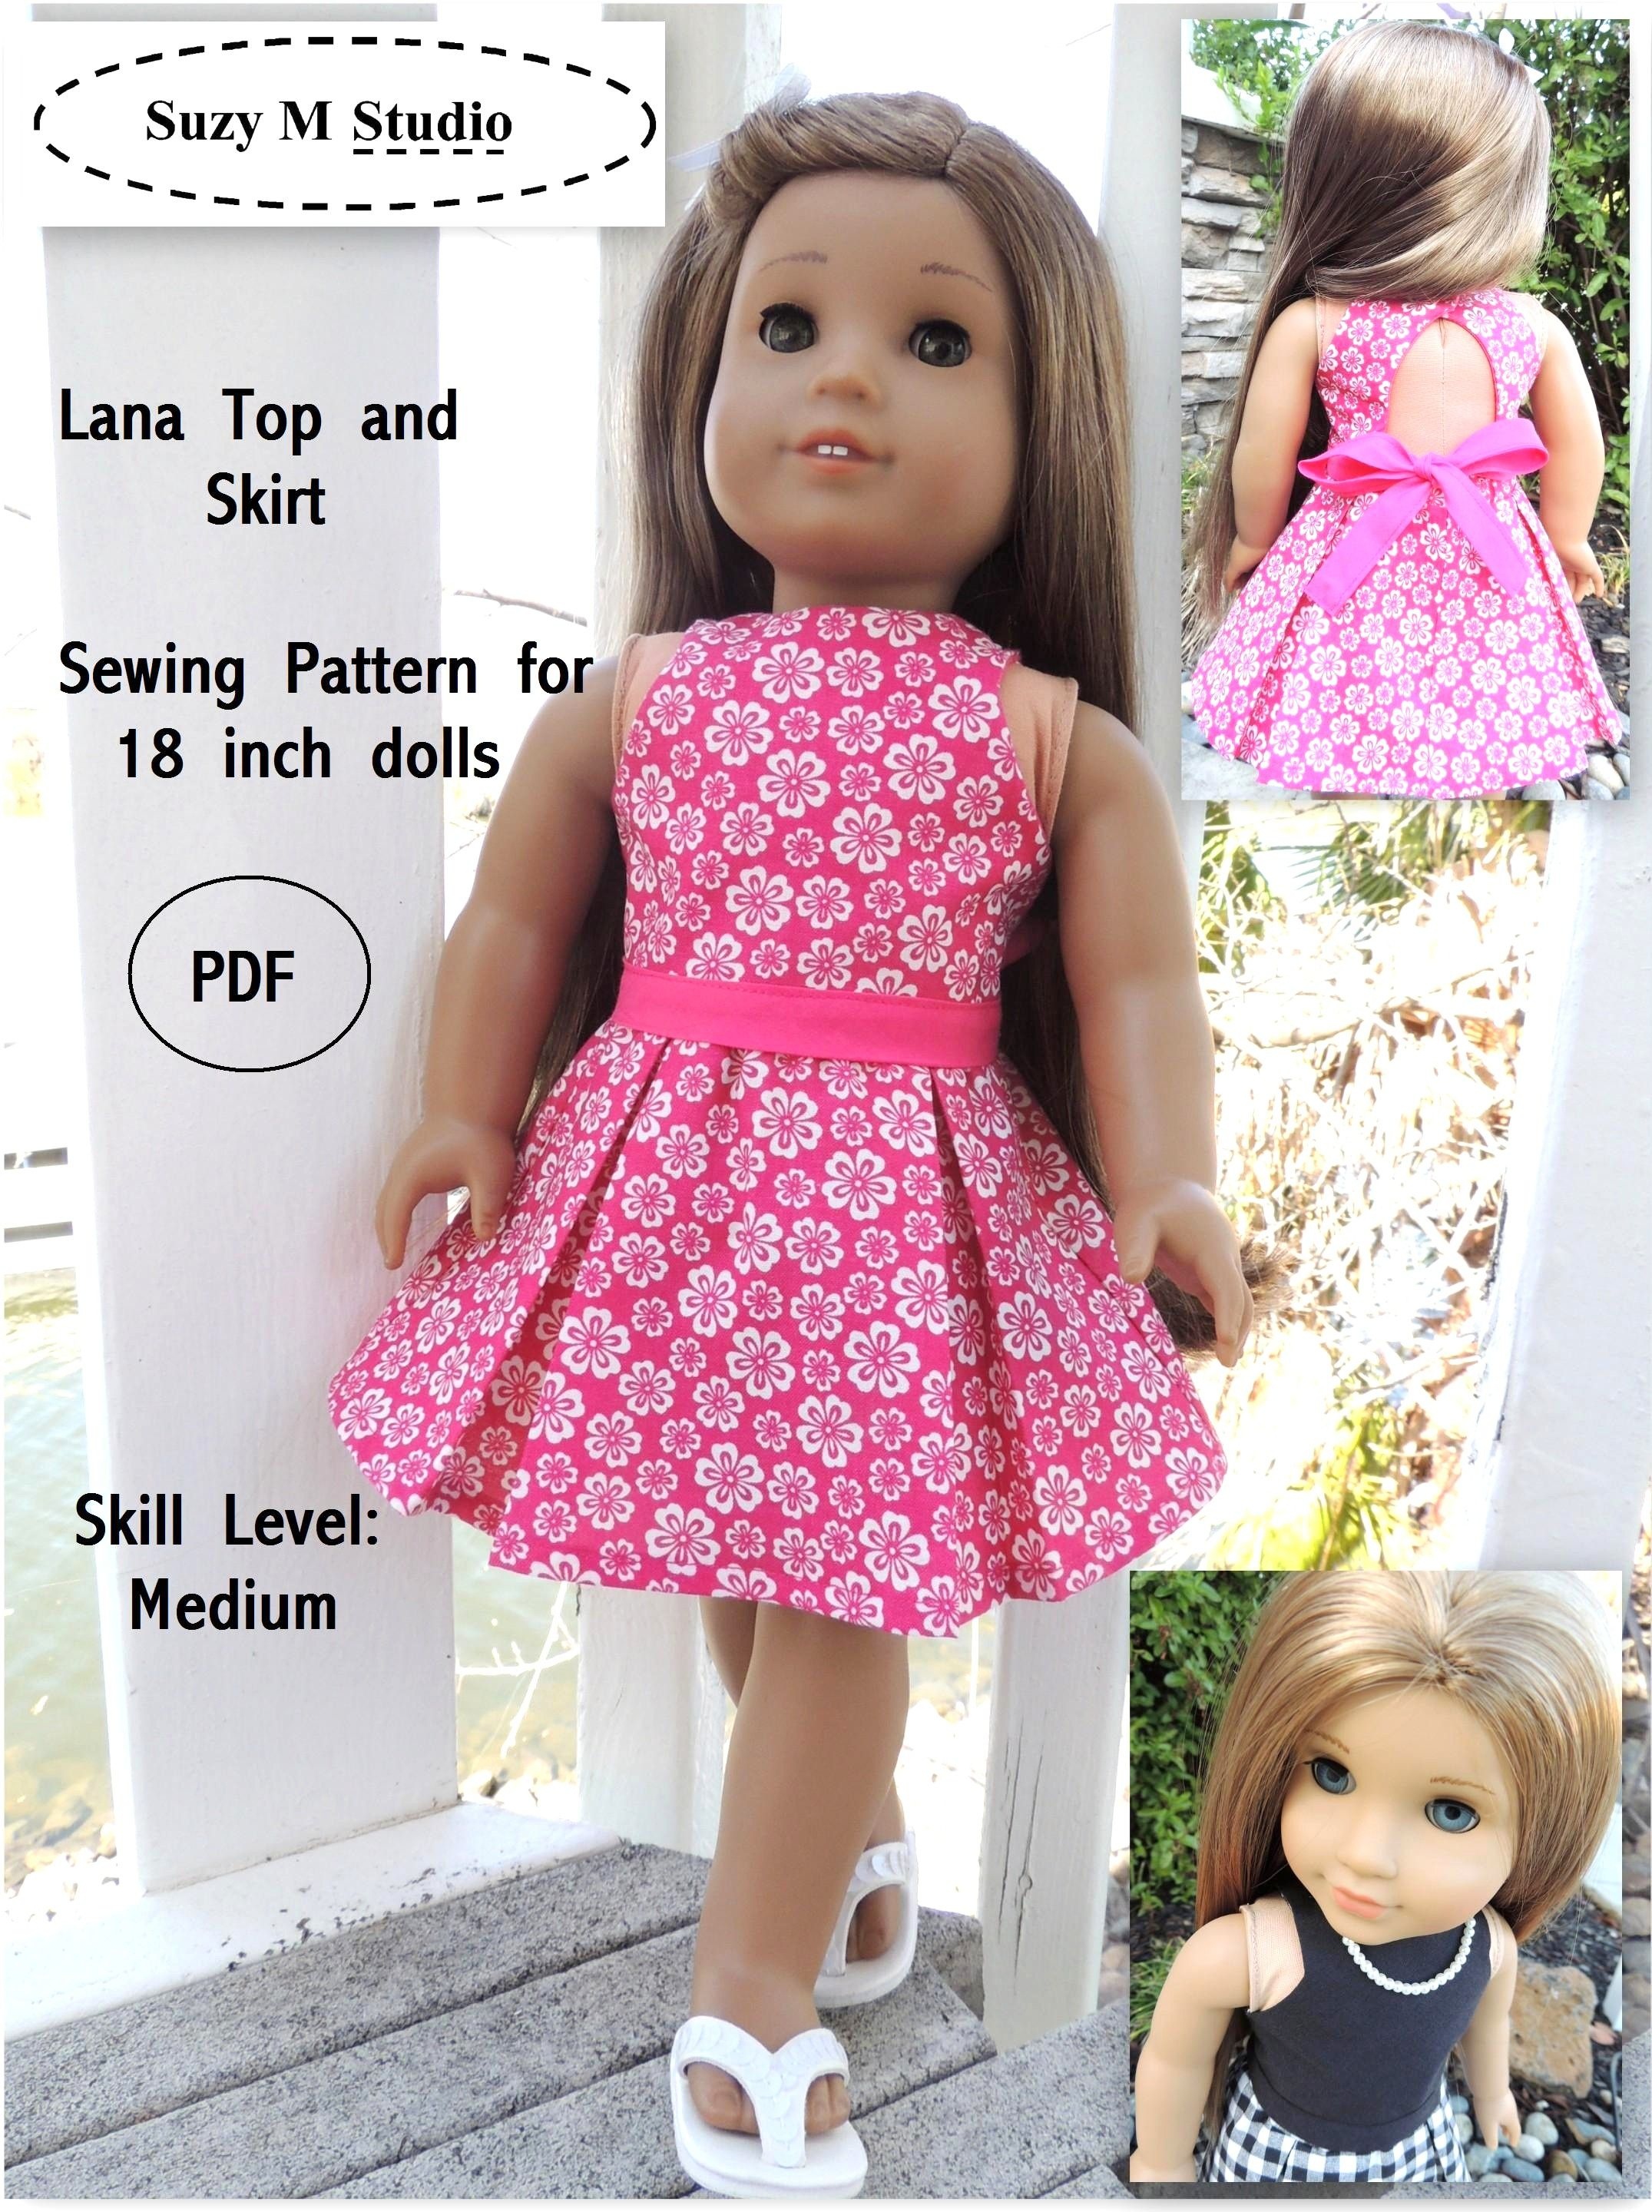 Free Printable Sewing Patterns For 18 Inch Doll Clothes Free Printable